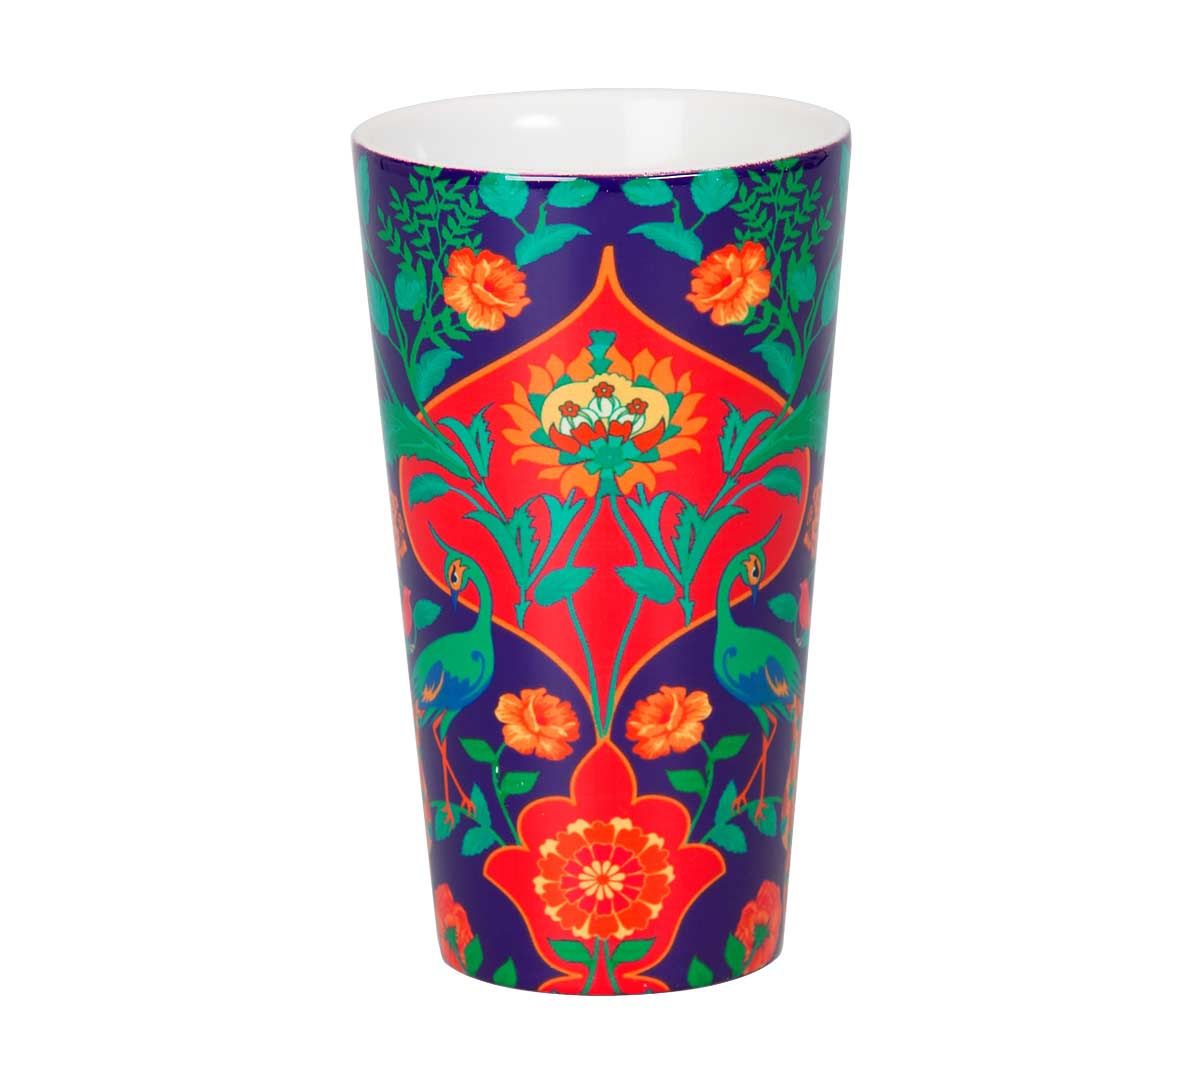 Peacock Psychedelic Conical Mug